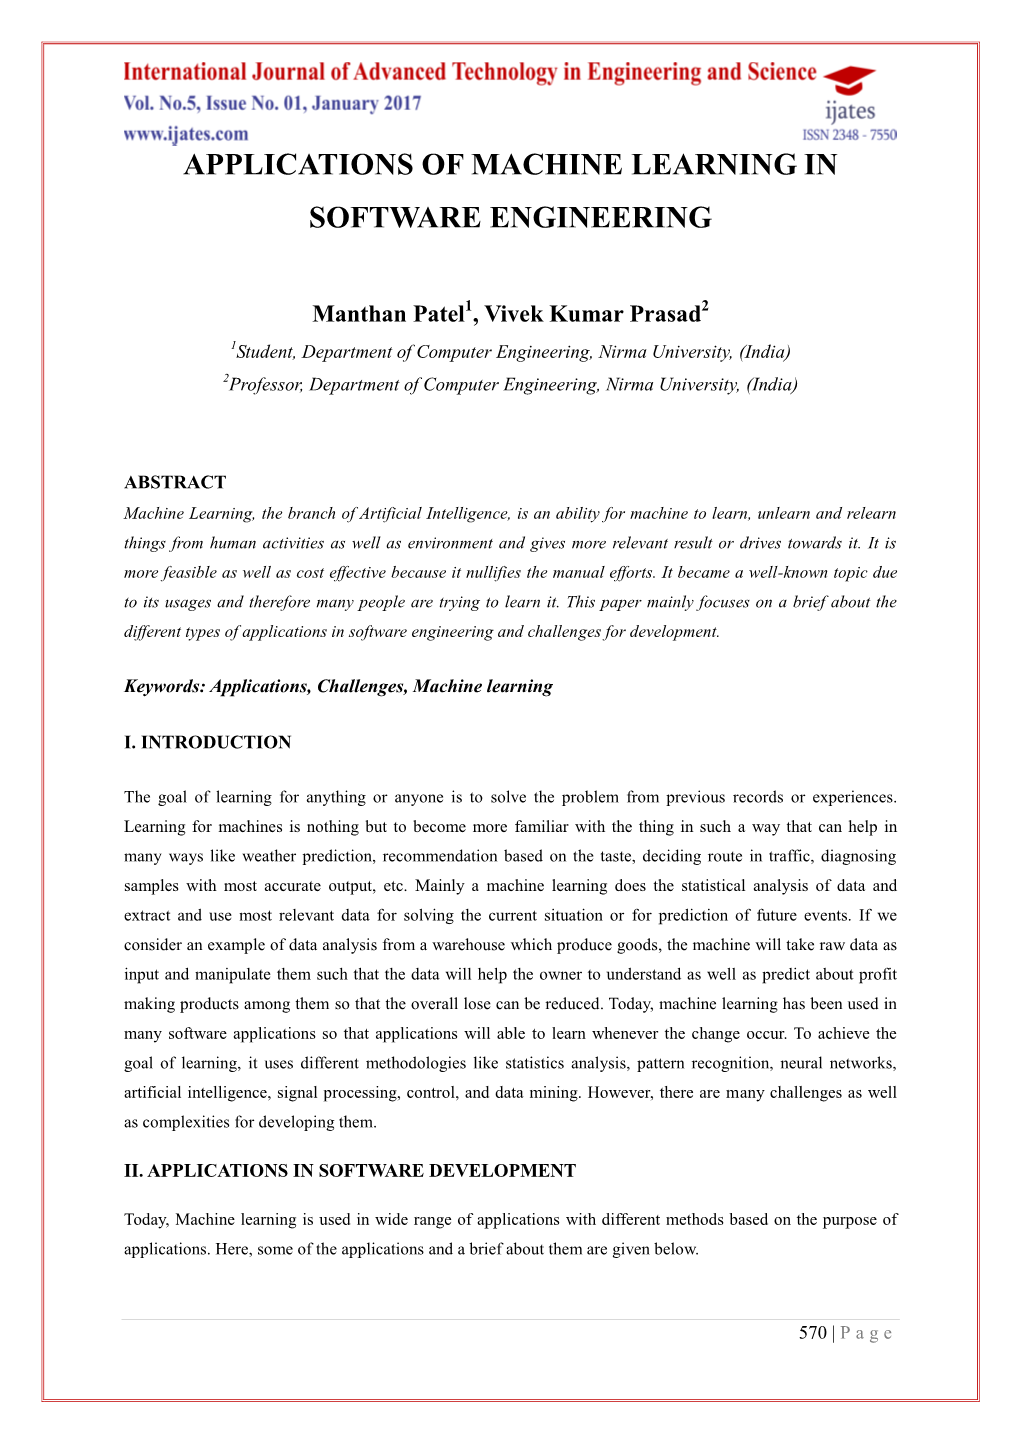 Applications of Machine Learning in Software Engineering